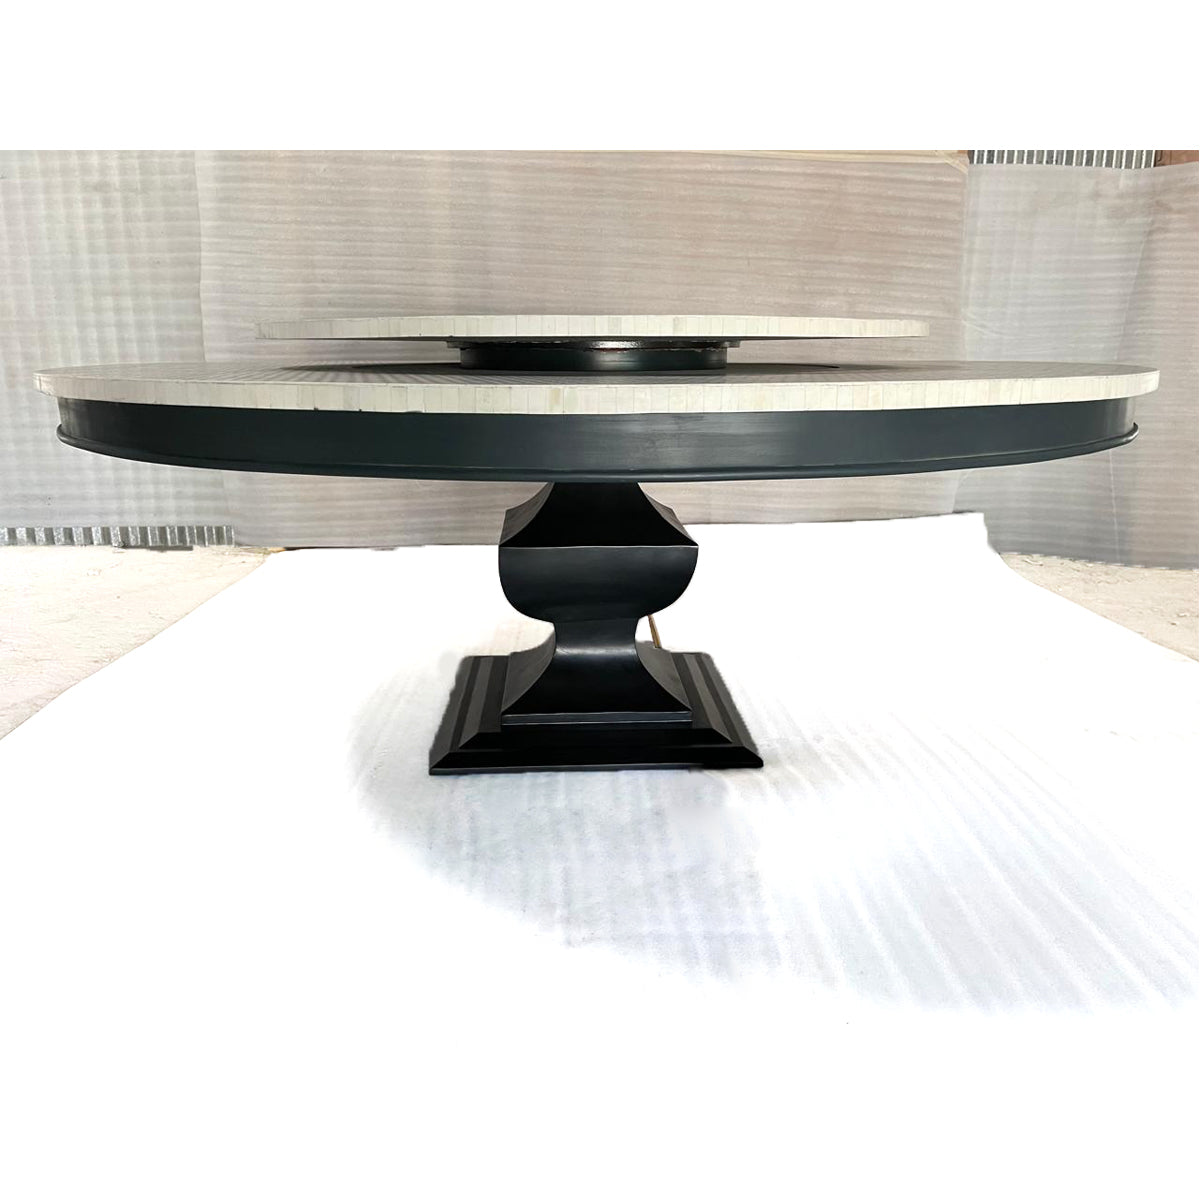 Ruby Bone Inlay Round Dining Table With Lazy Susan Top - Grey - Notbrand